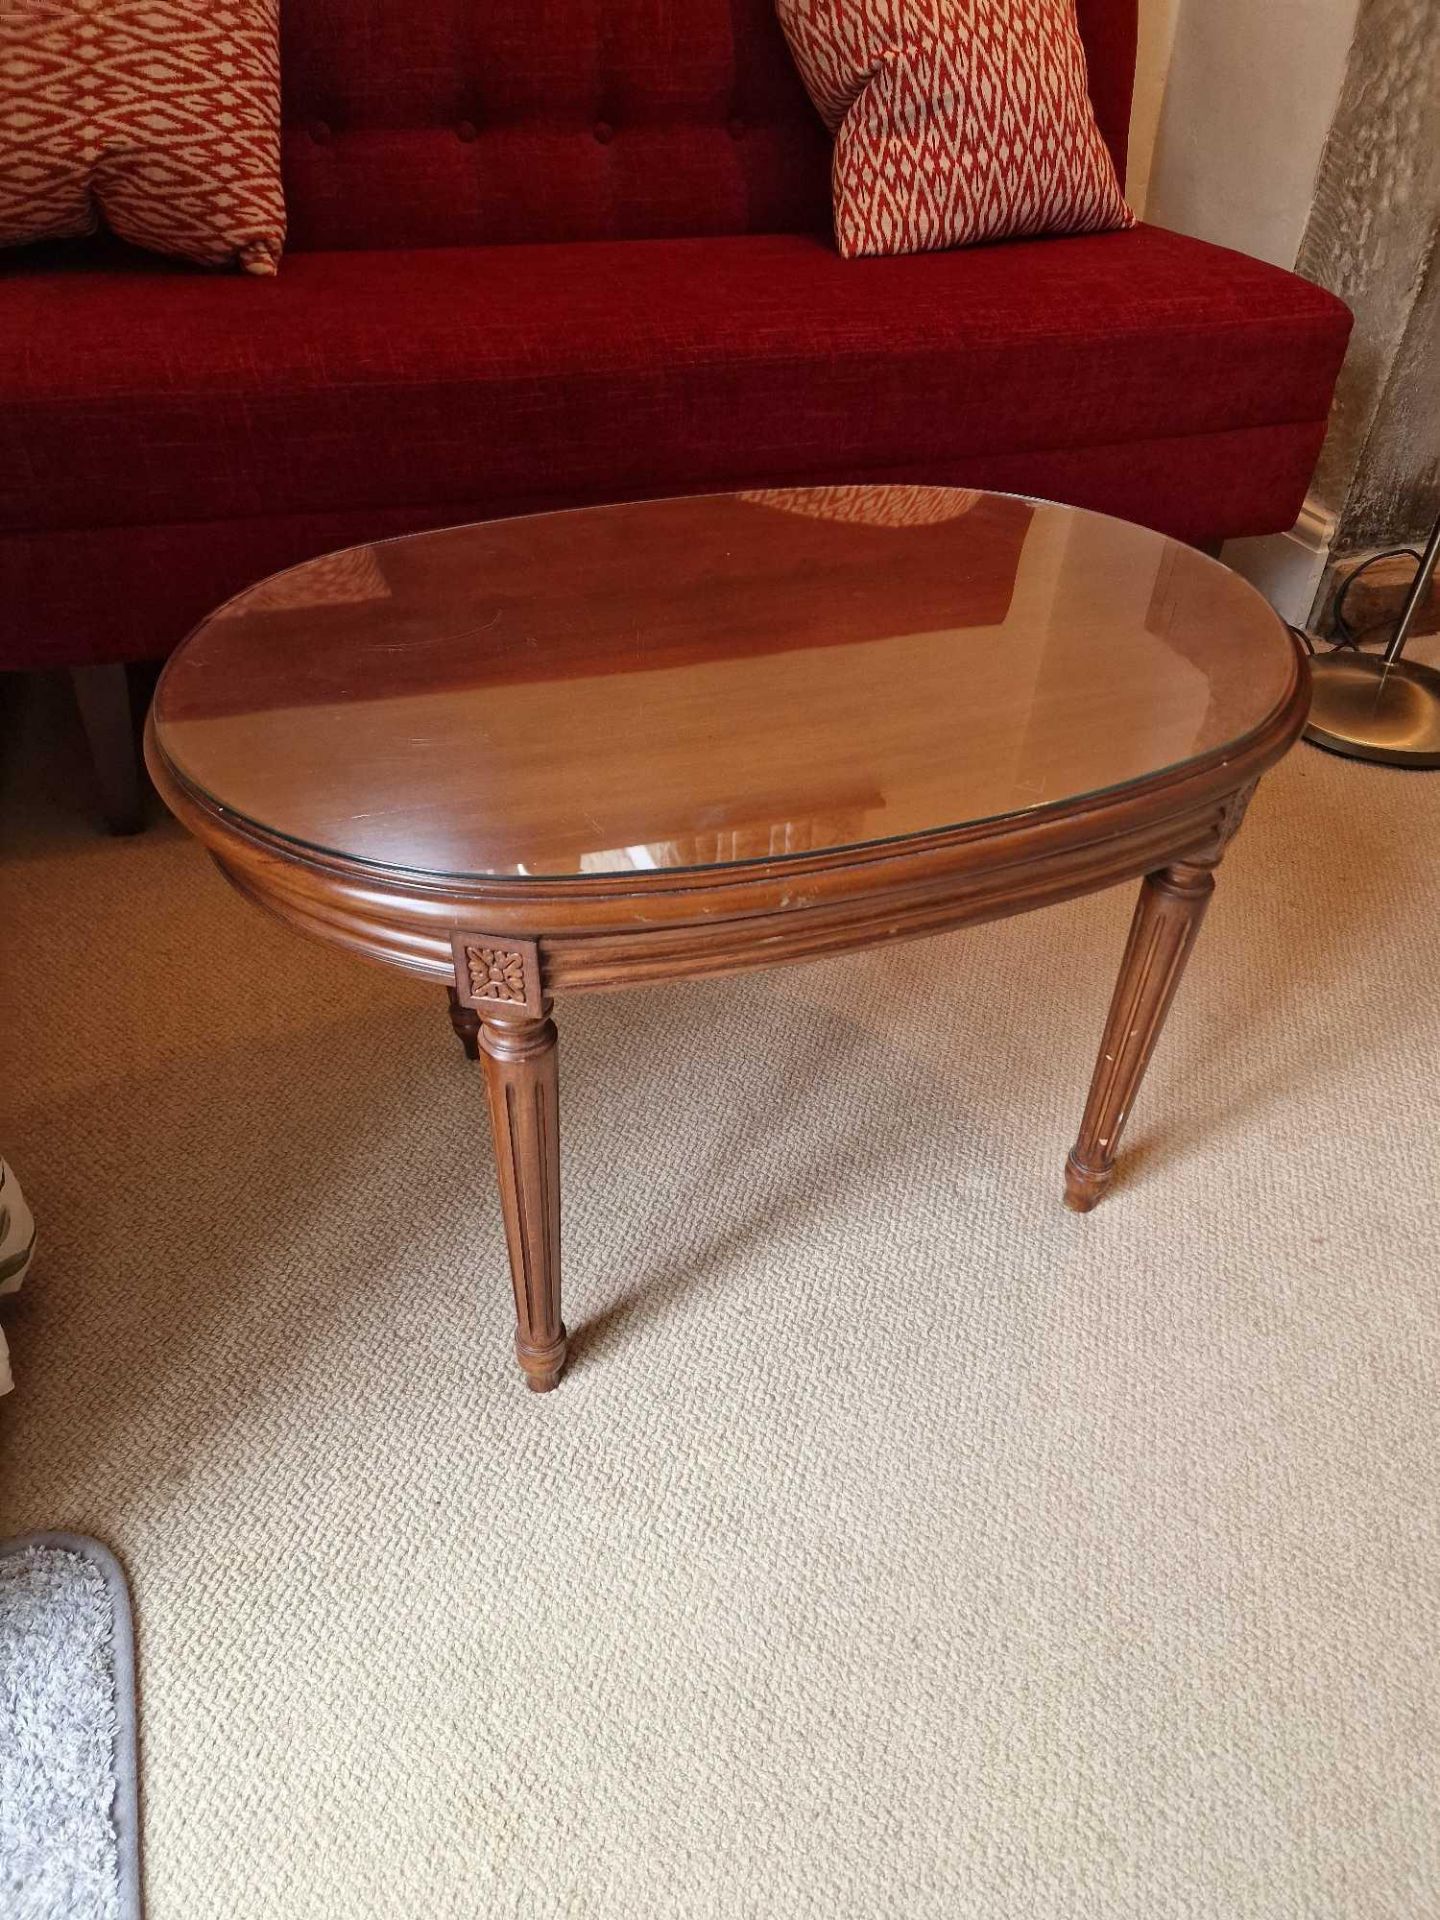 A Regency Style Ovoid Coffee Table Shaped Mahogany Top Raised On Tapered And Turned Fluted Legs With